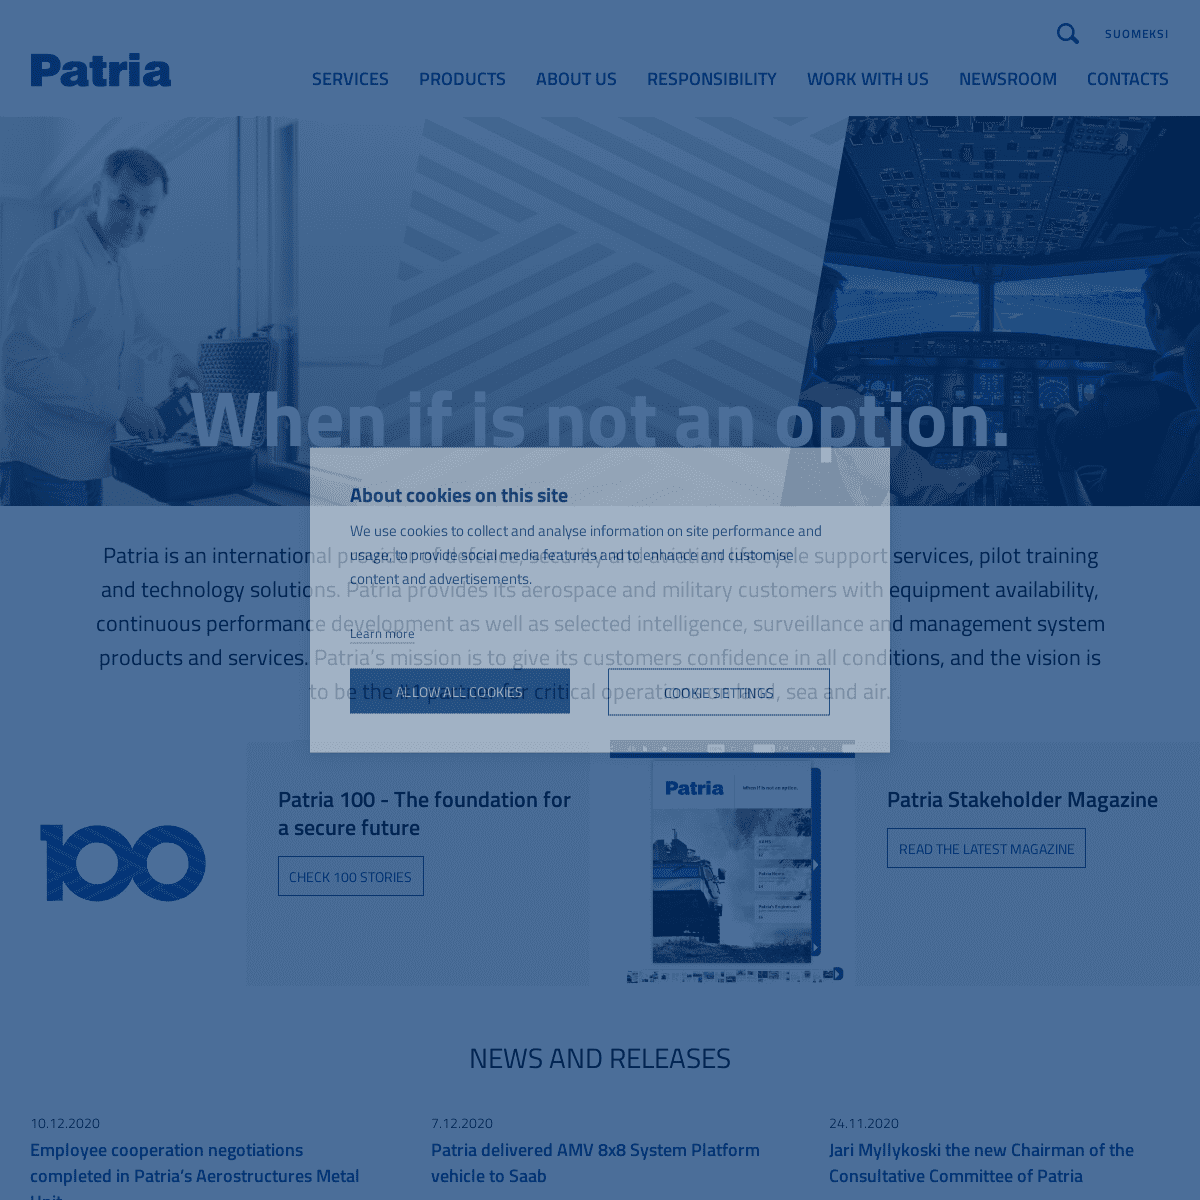 A complete backup of patriagroup.com